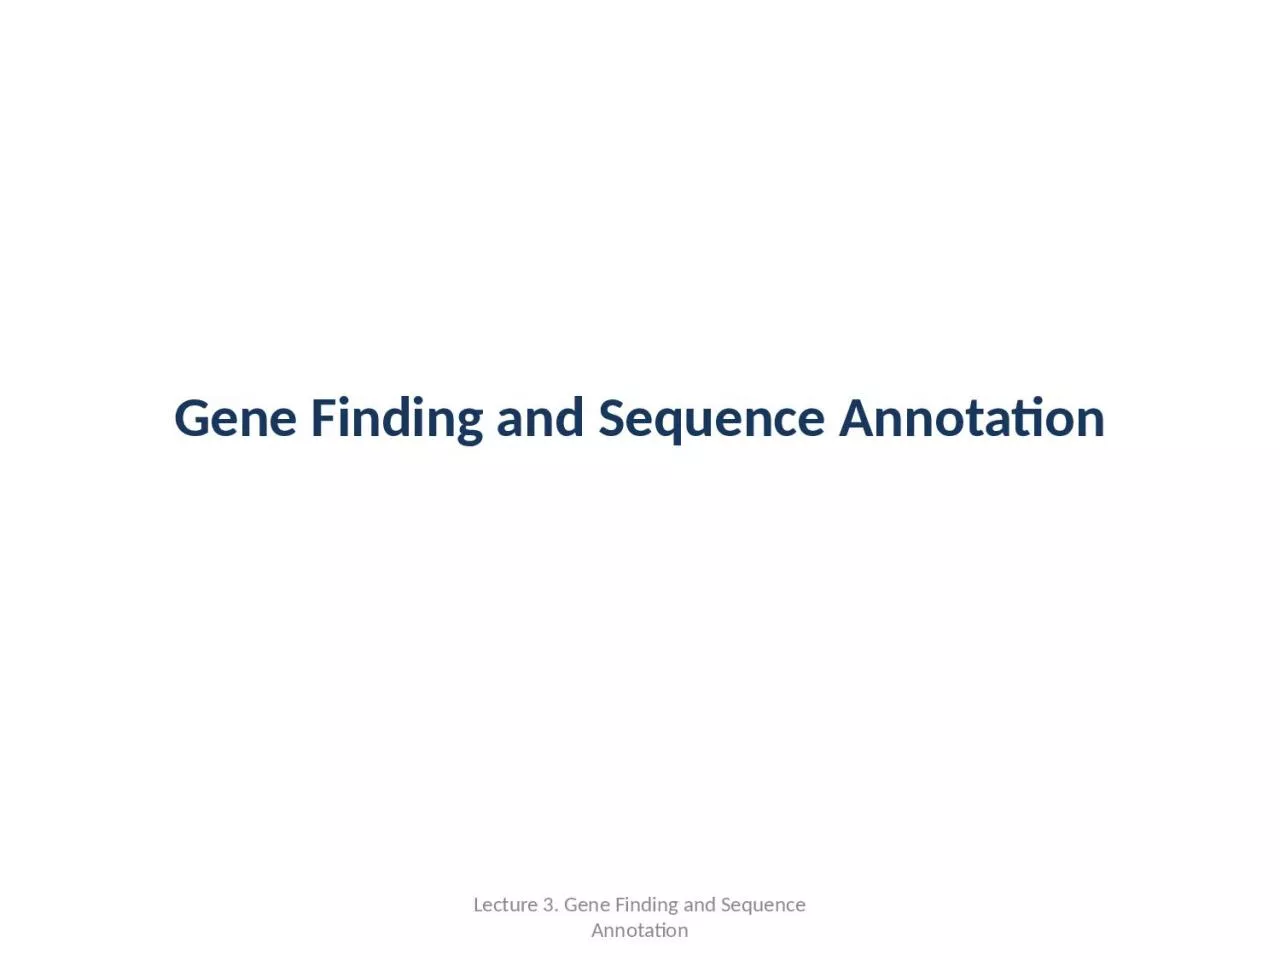 Gene Finding and Sequence Annotation